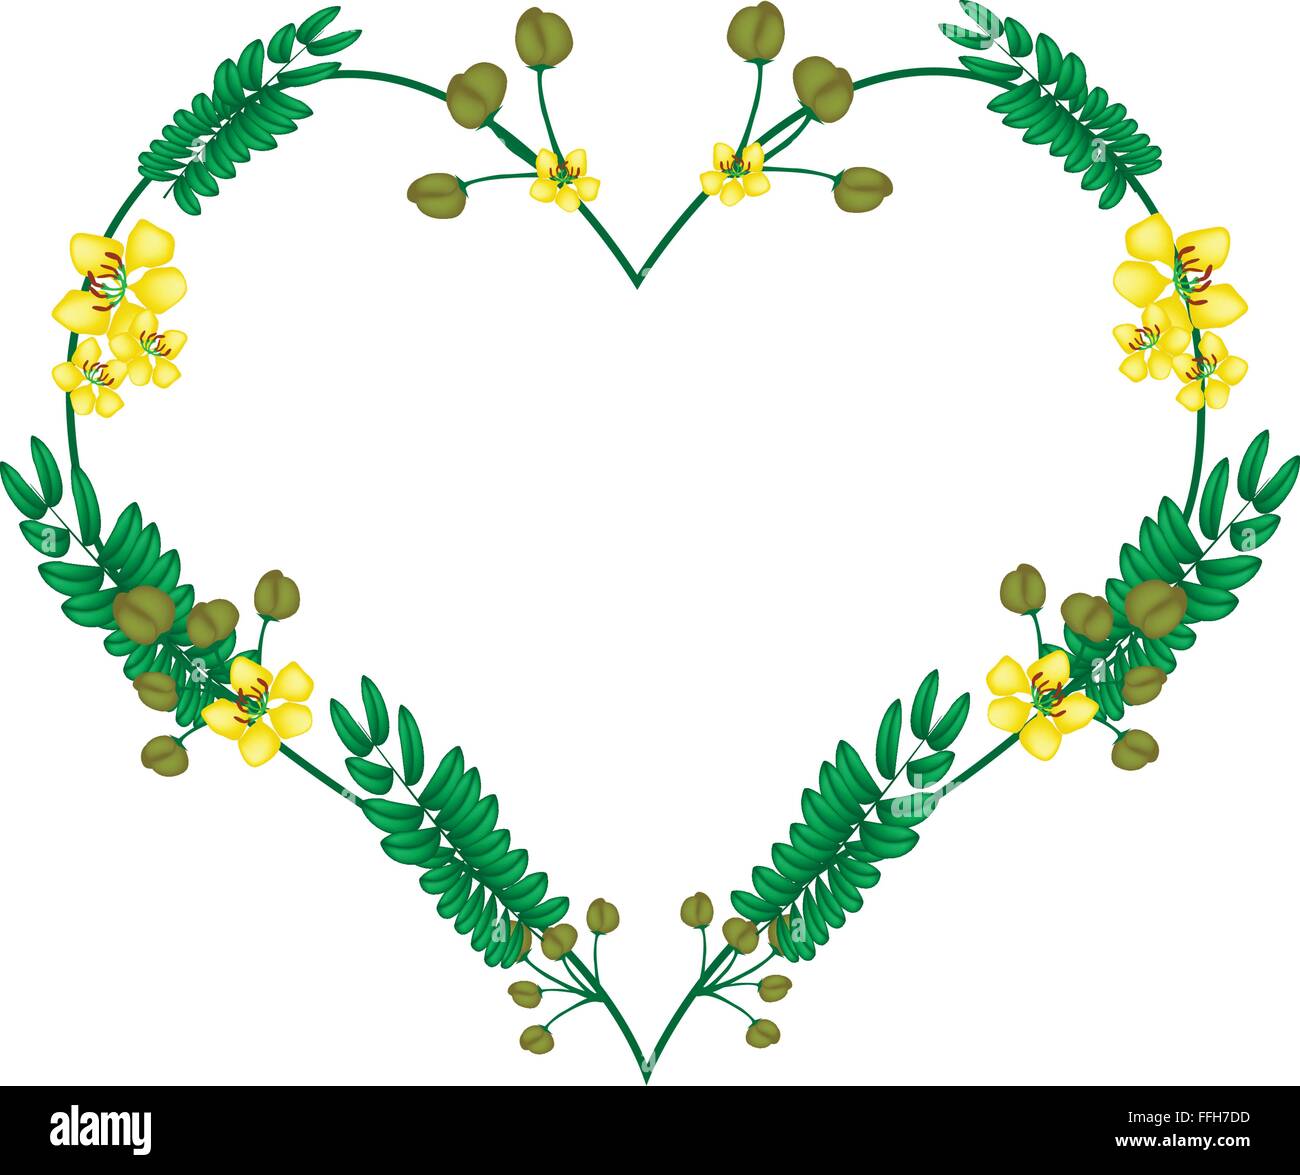 Love Concept, Illustration of Yellow Cassod Flowers and Green Leaves Forming in Heart Shape Isolated on White Background. Stock Vector